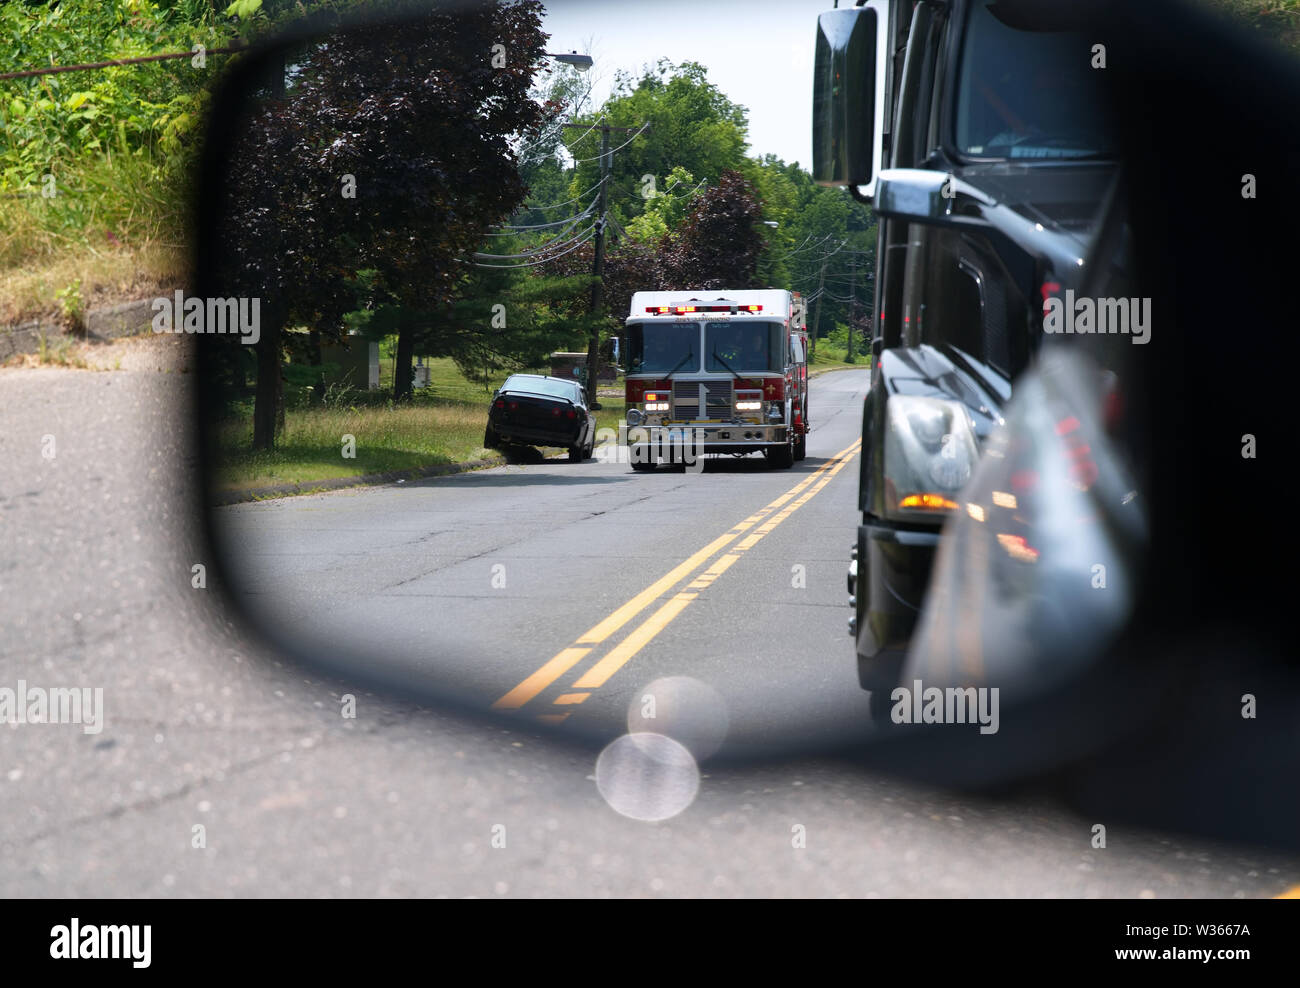 Middletown, CT USA. Car side mirror view of vehicles pulling over for a fast fire truck responding to an emergency. Stock Photo